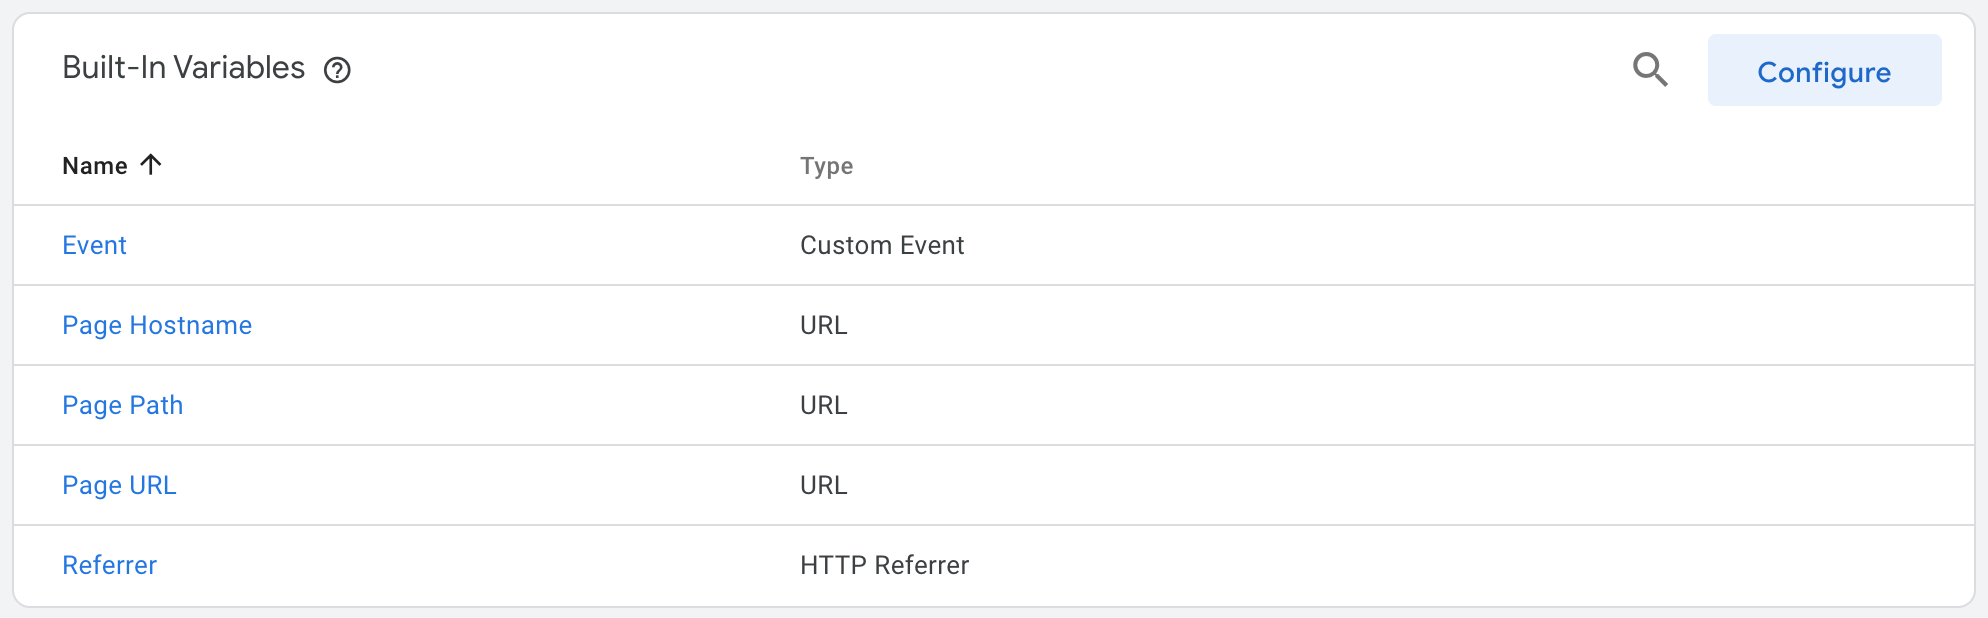 examples of built-in variables in google tag manager